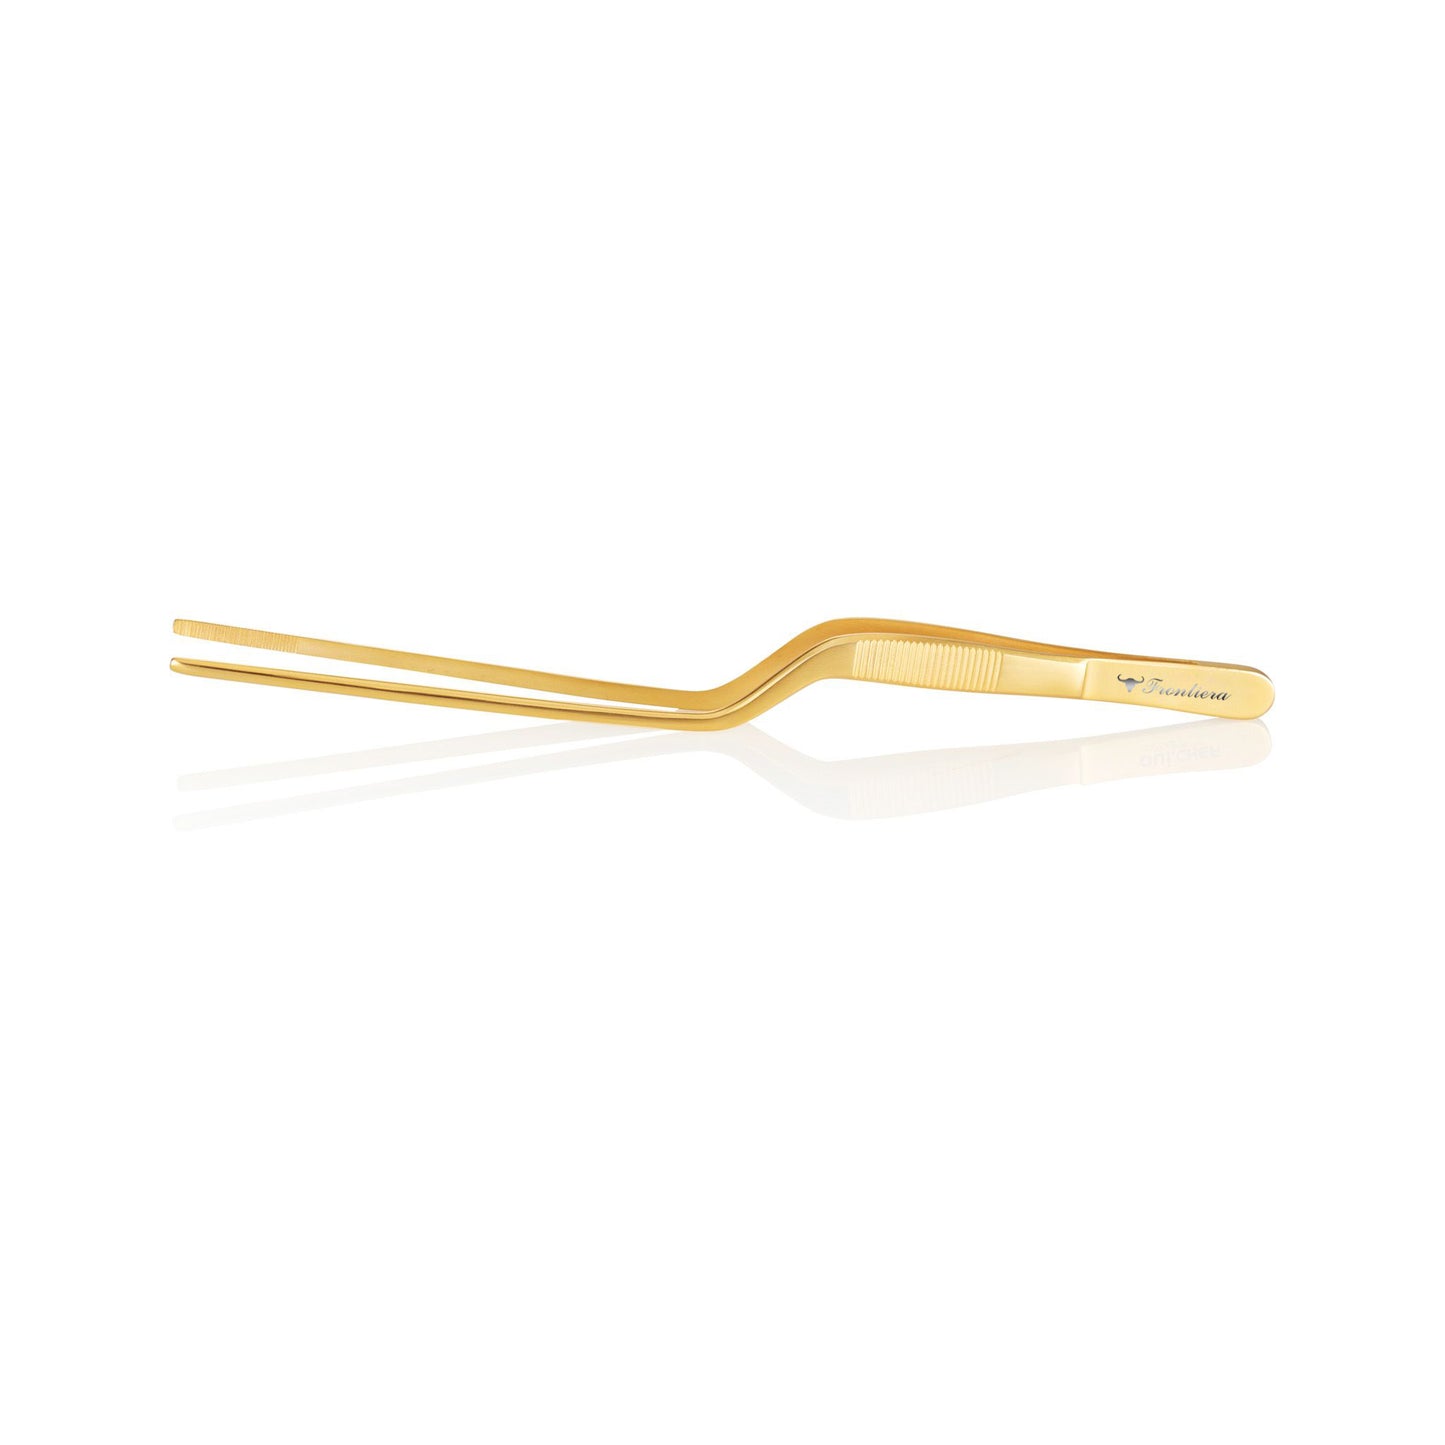 High Precision Offset Chef's Tweezers (20cm/7.87") Gold + Custome Engraving (Optional)